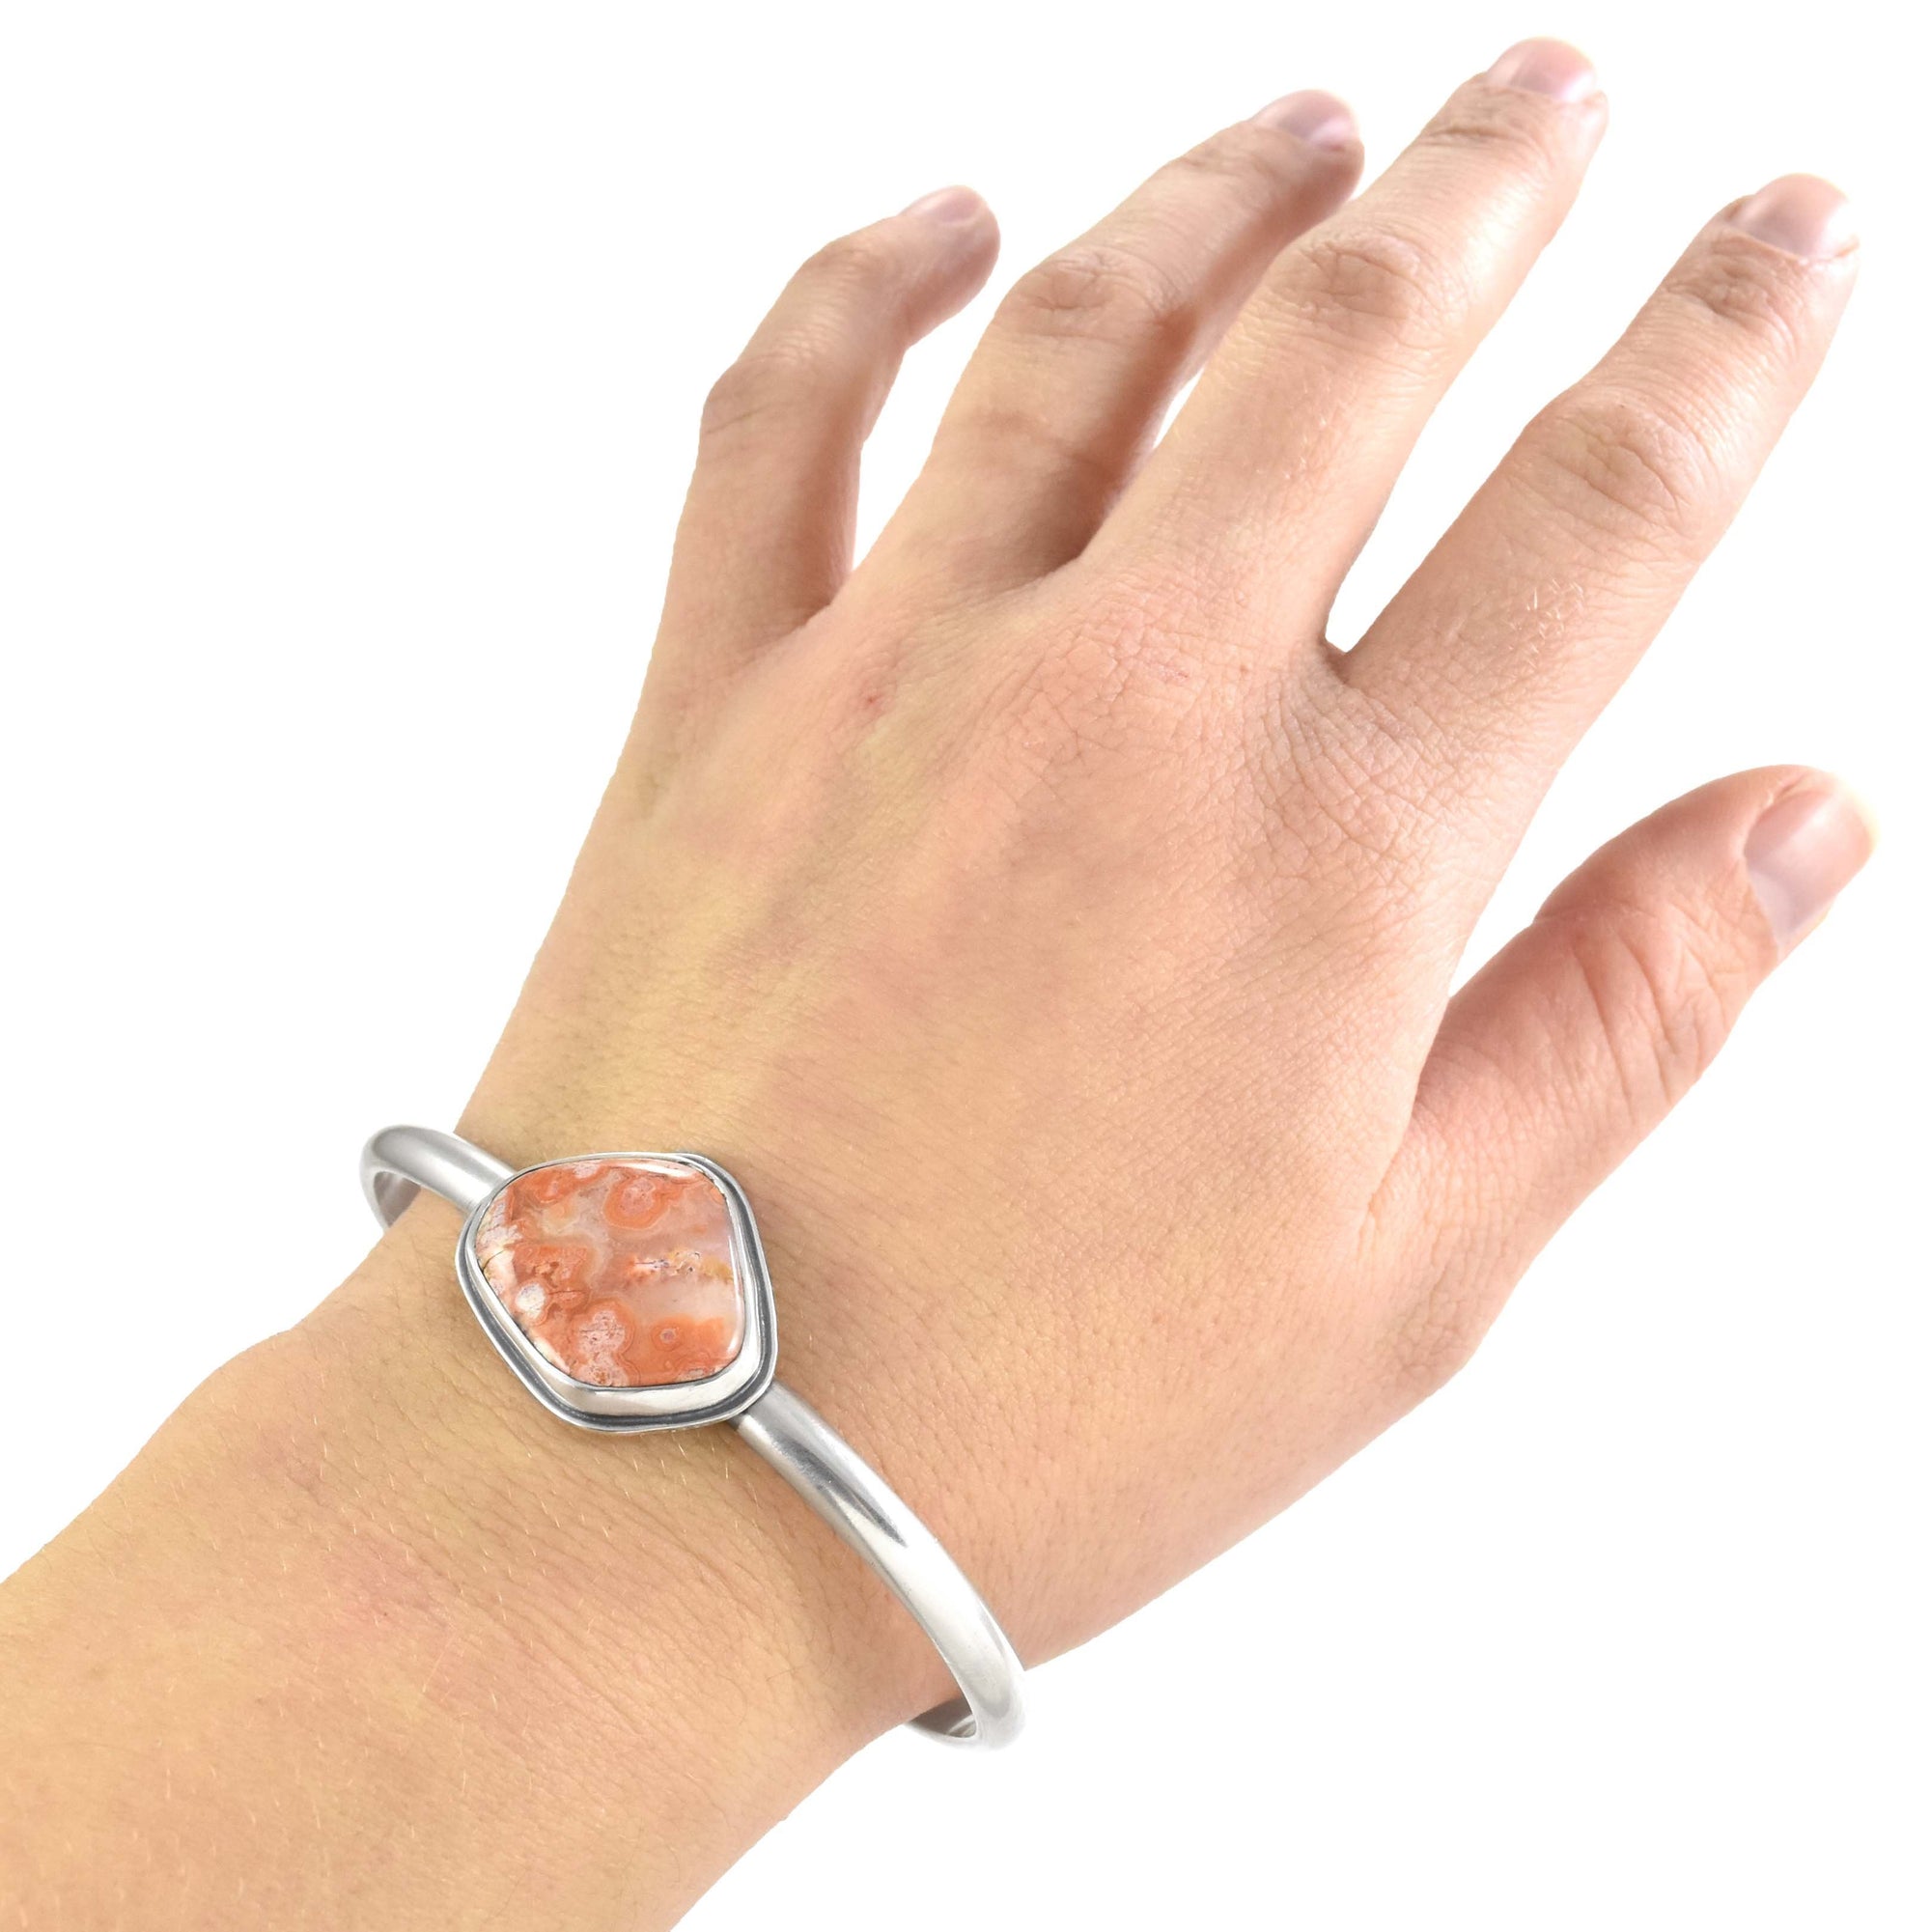 Lake Superior Agate Cuff  - Size Extra Large - Bracelet   4004 - handmade by Beth Millner Jewelry